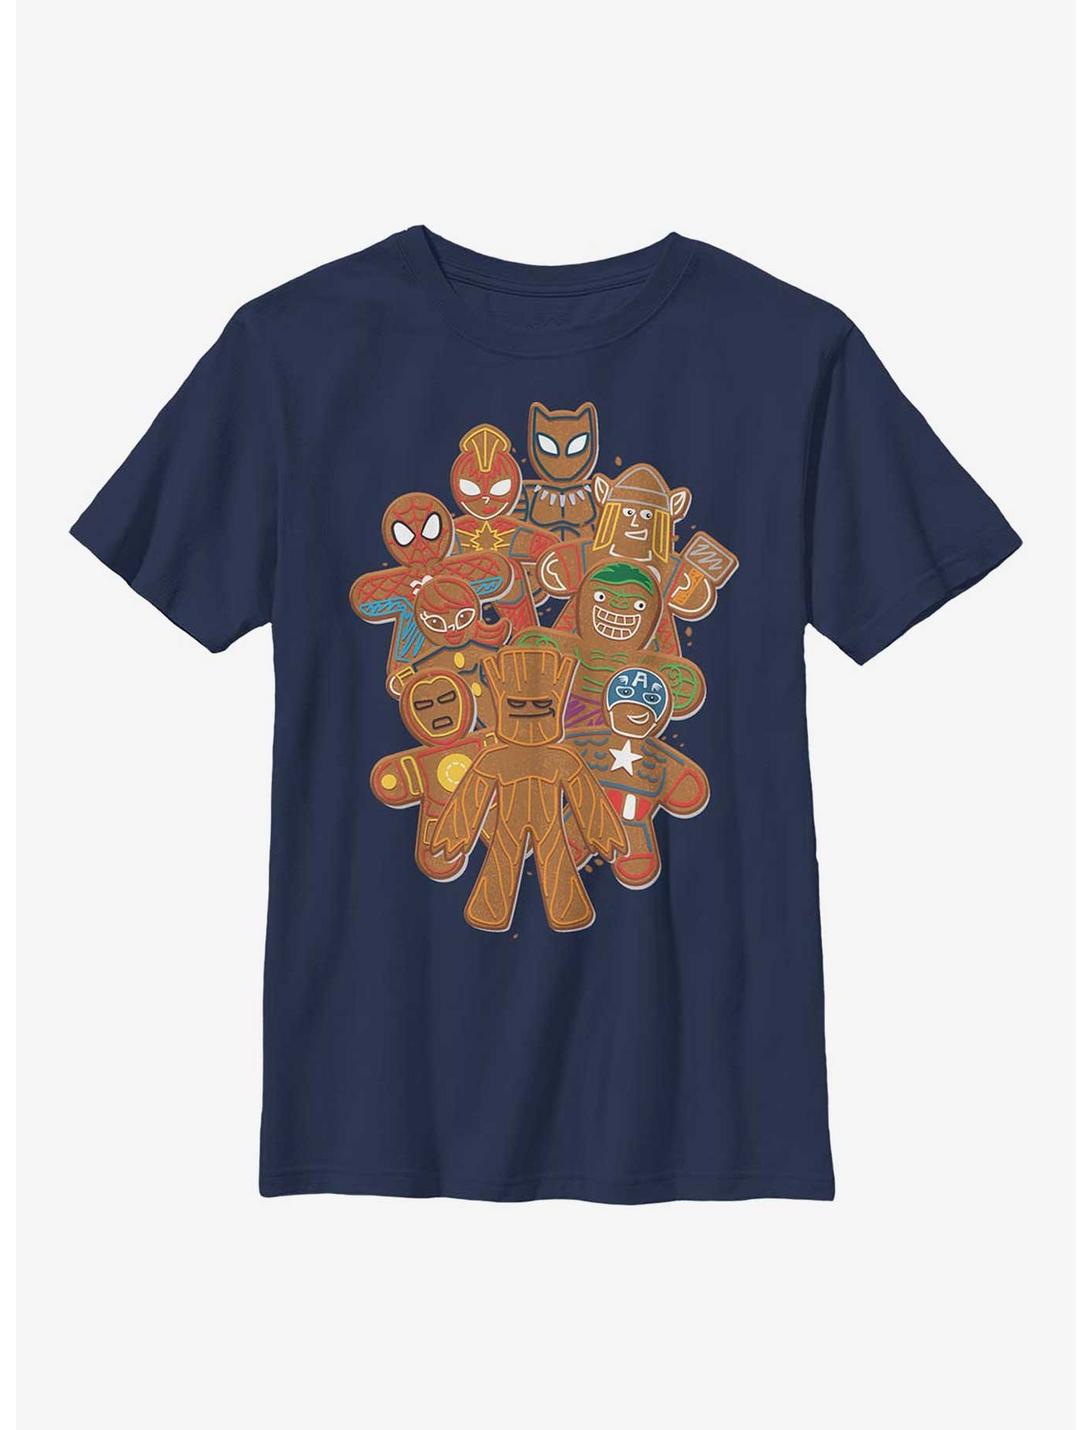 Marvel Avengers Gingerbread Cookies Youth T-Shirt, NAVY, hi-res